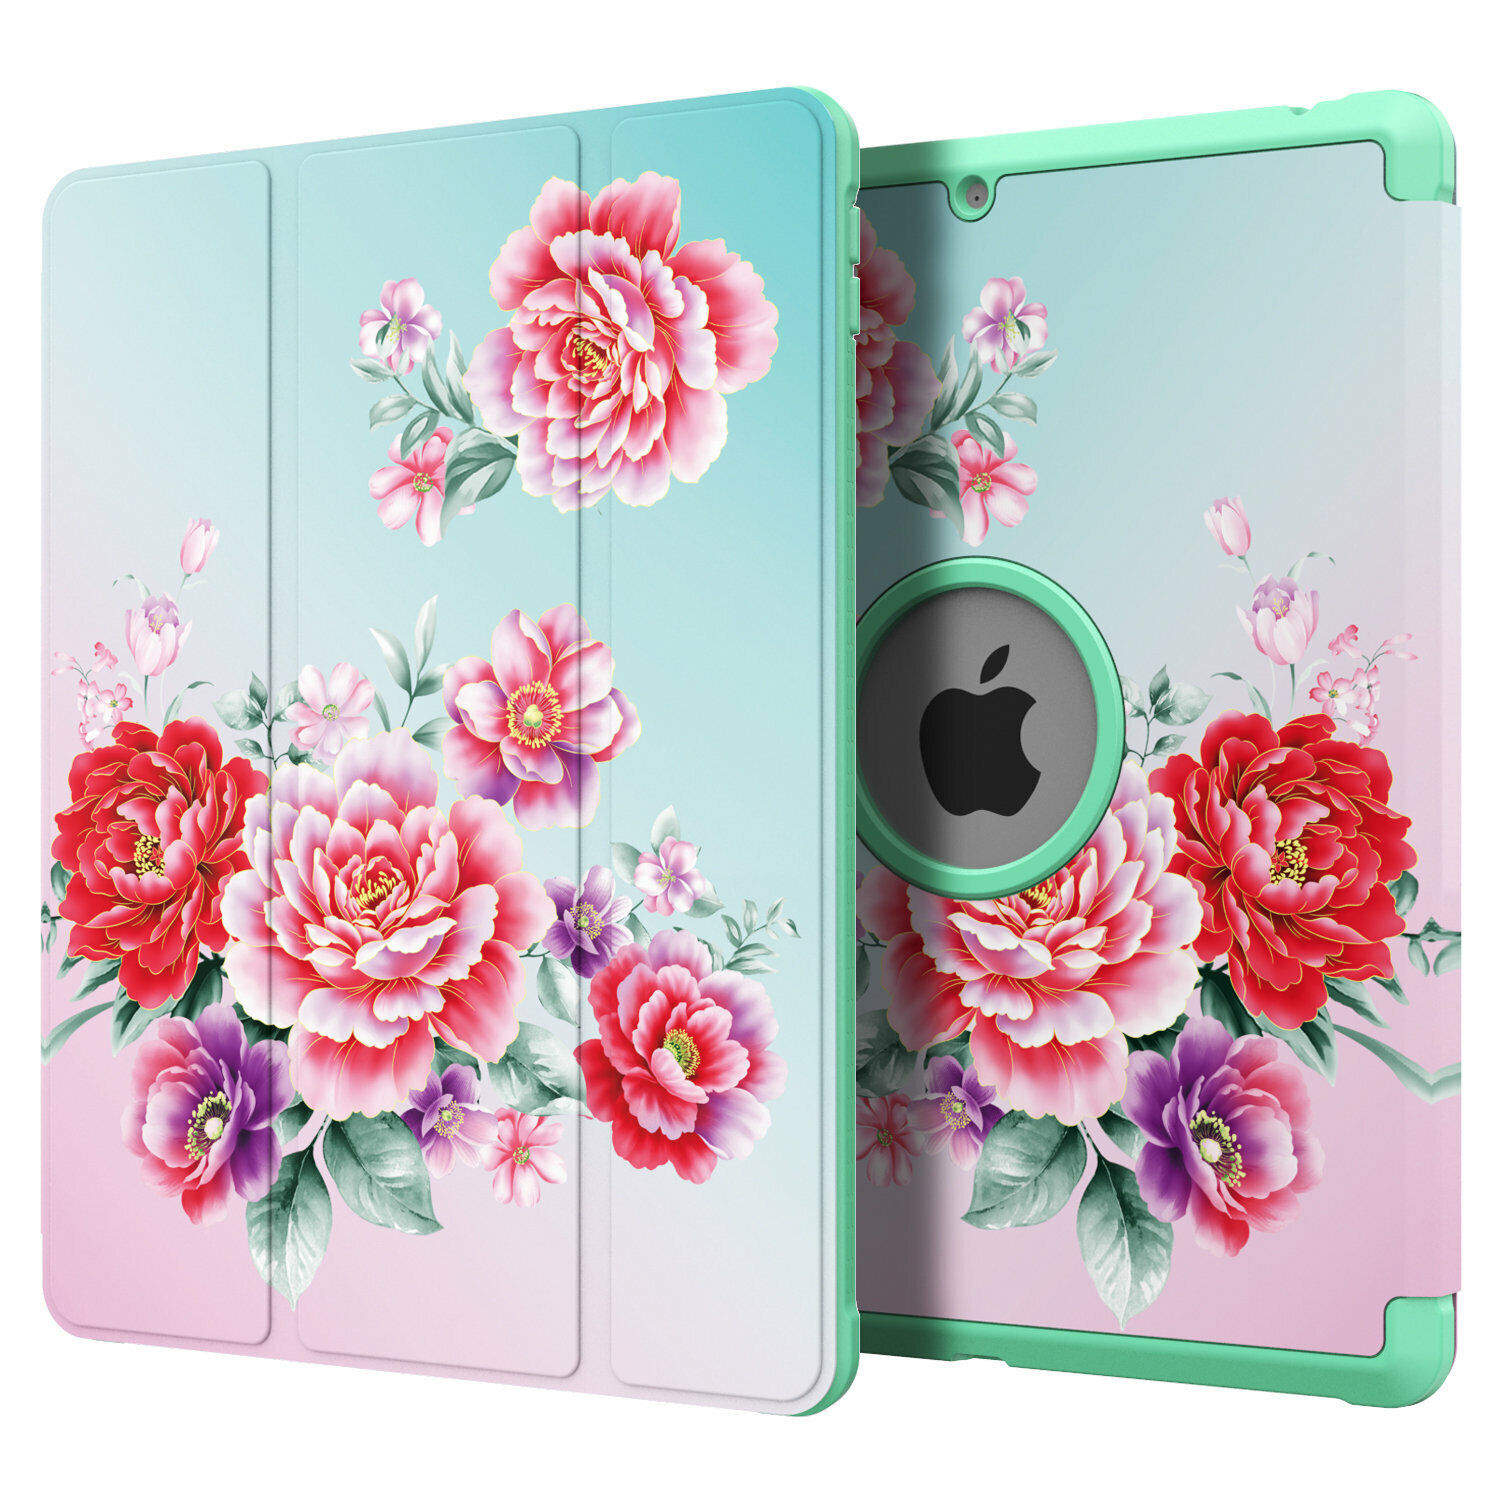 Marble Pattern Case For iPad 10.2 2020 8th Generation 7th 2019 Flip Stand Cover